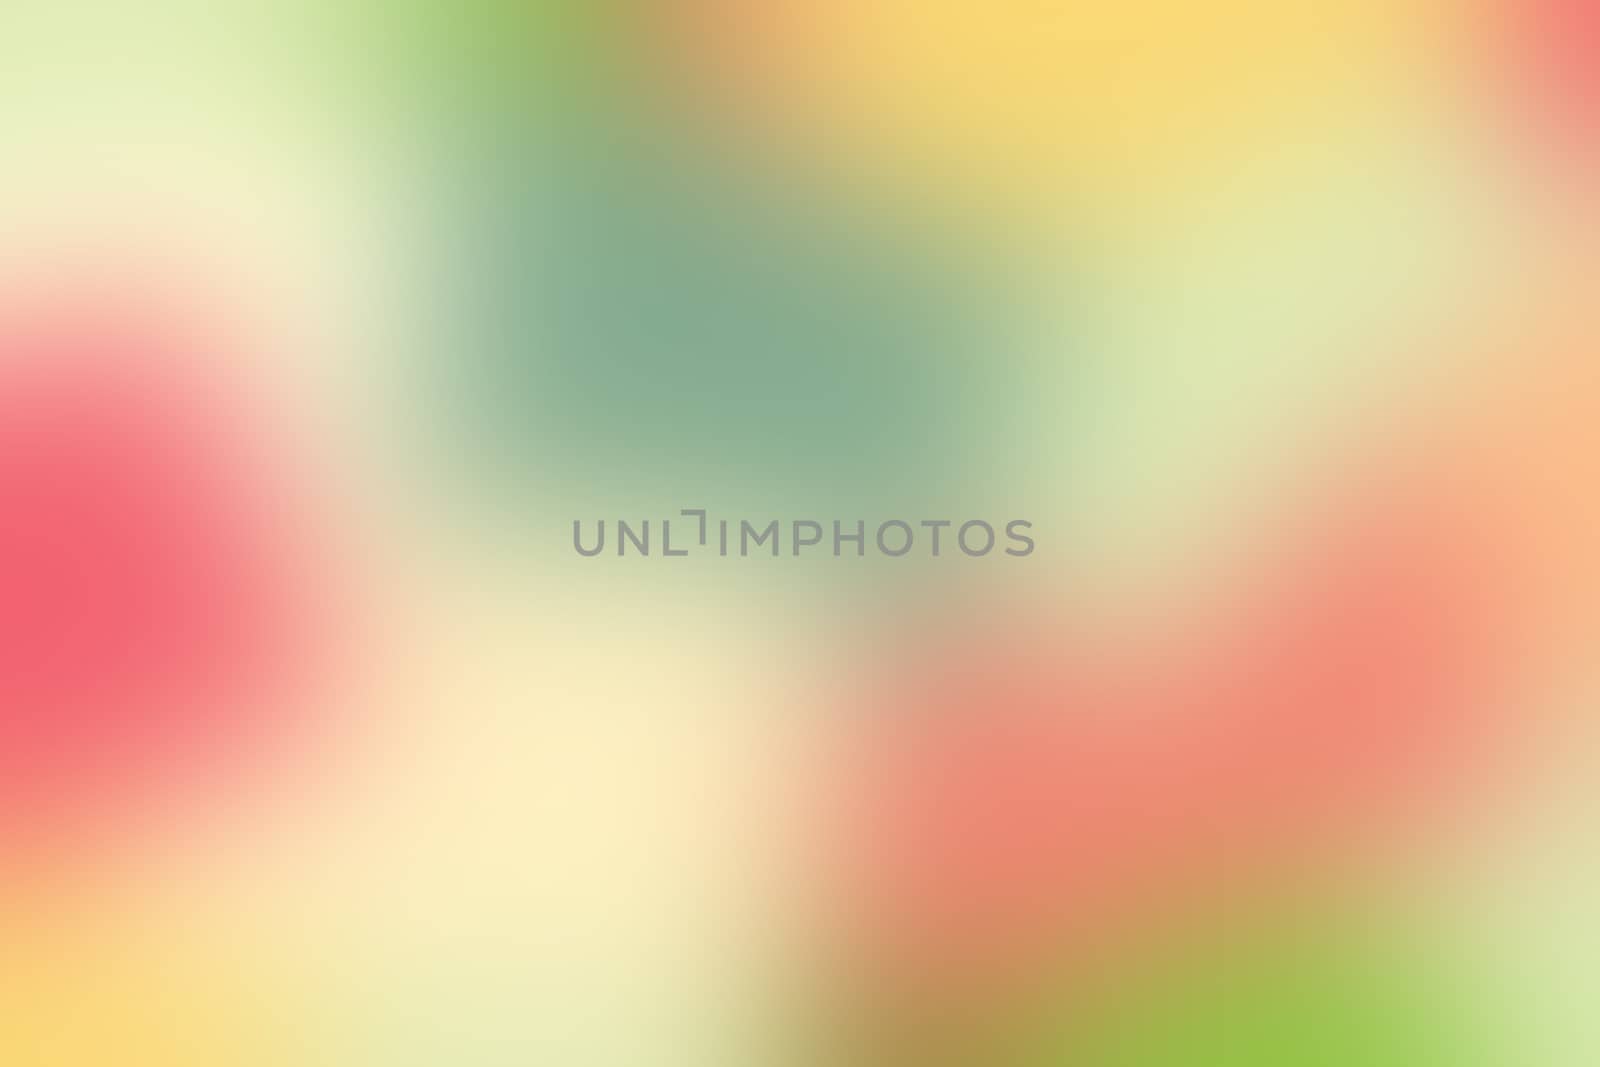 blurred gradient hue colorful pastel soft background illustration for cosmetics banner advertising background by cgdeaw